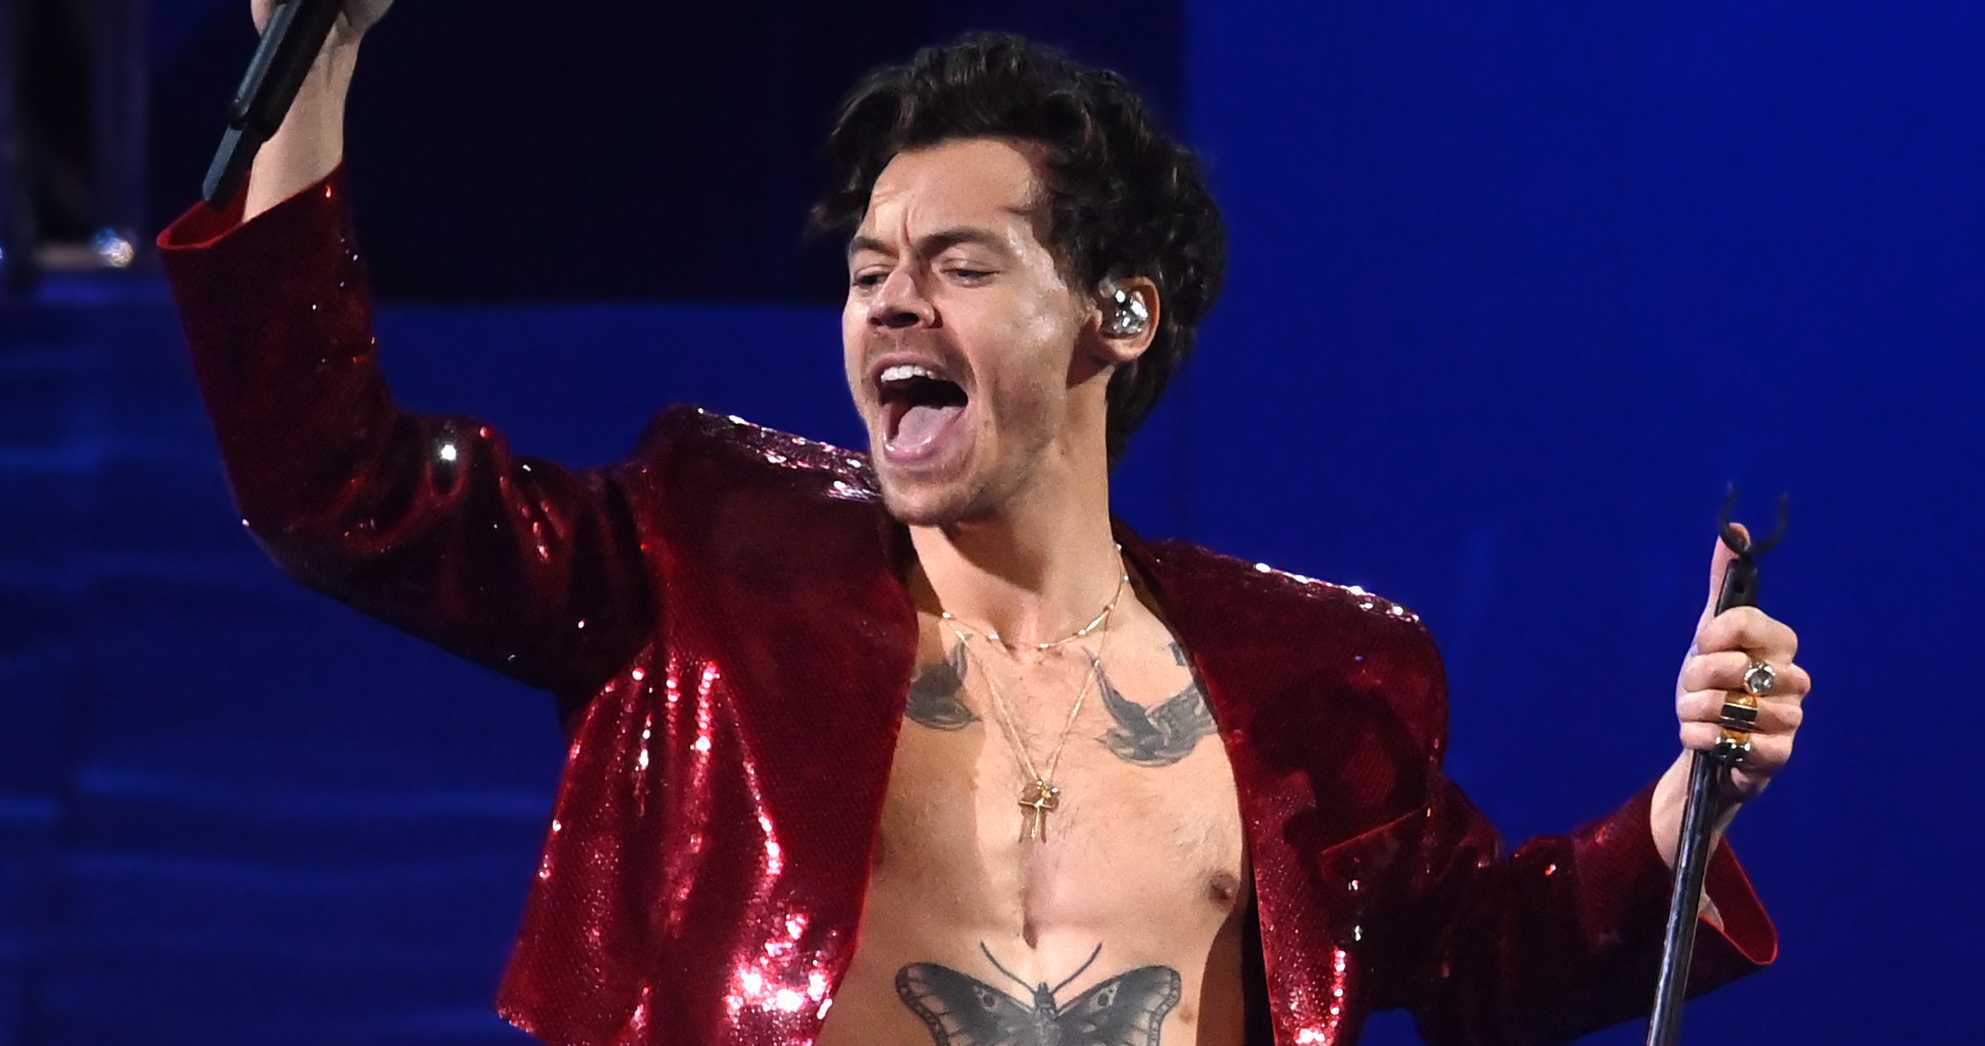 Twitter Is abuzz with speculation about Harry Styles possibly shaving his head as a reaction to Taylor Swift's lyrics